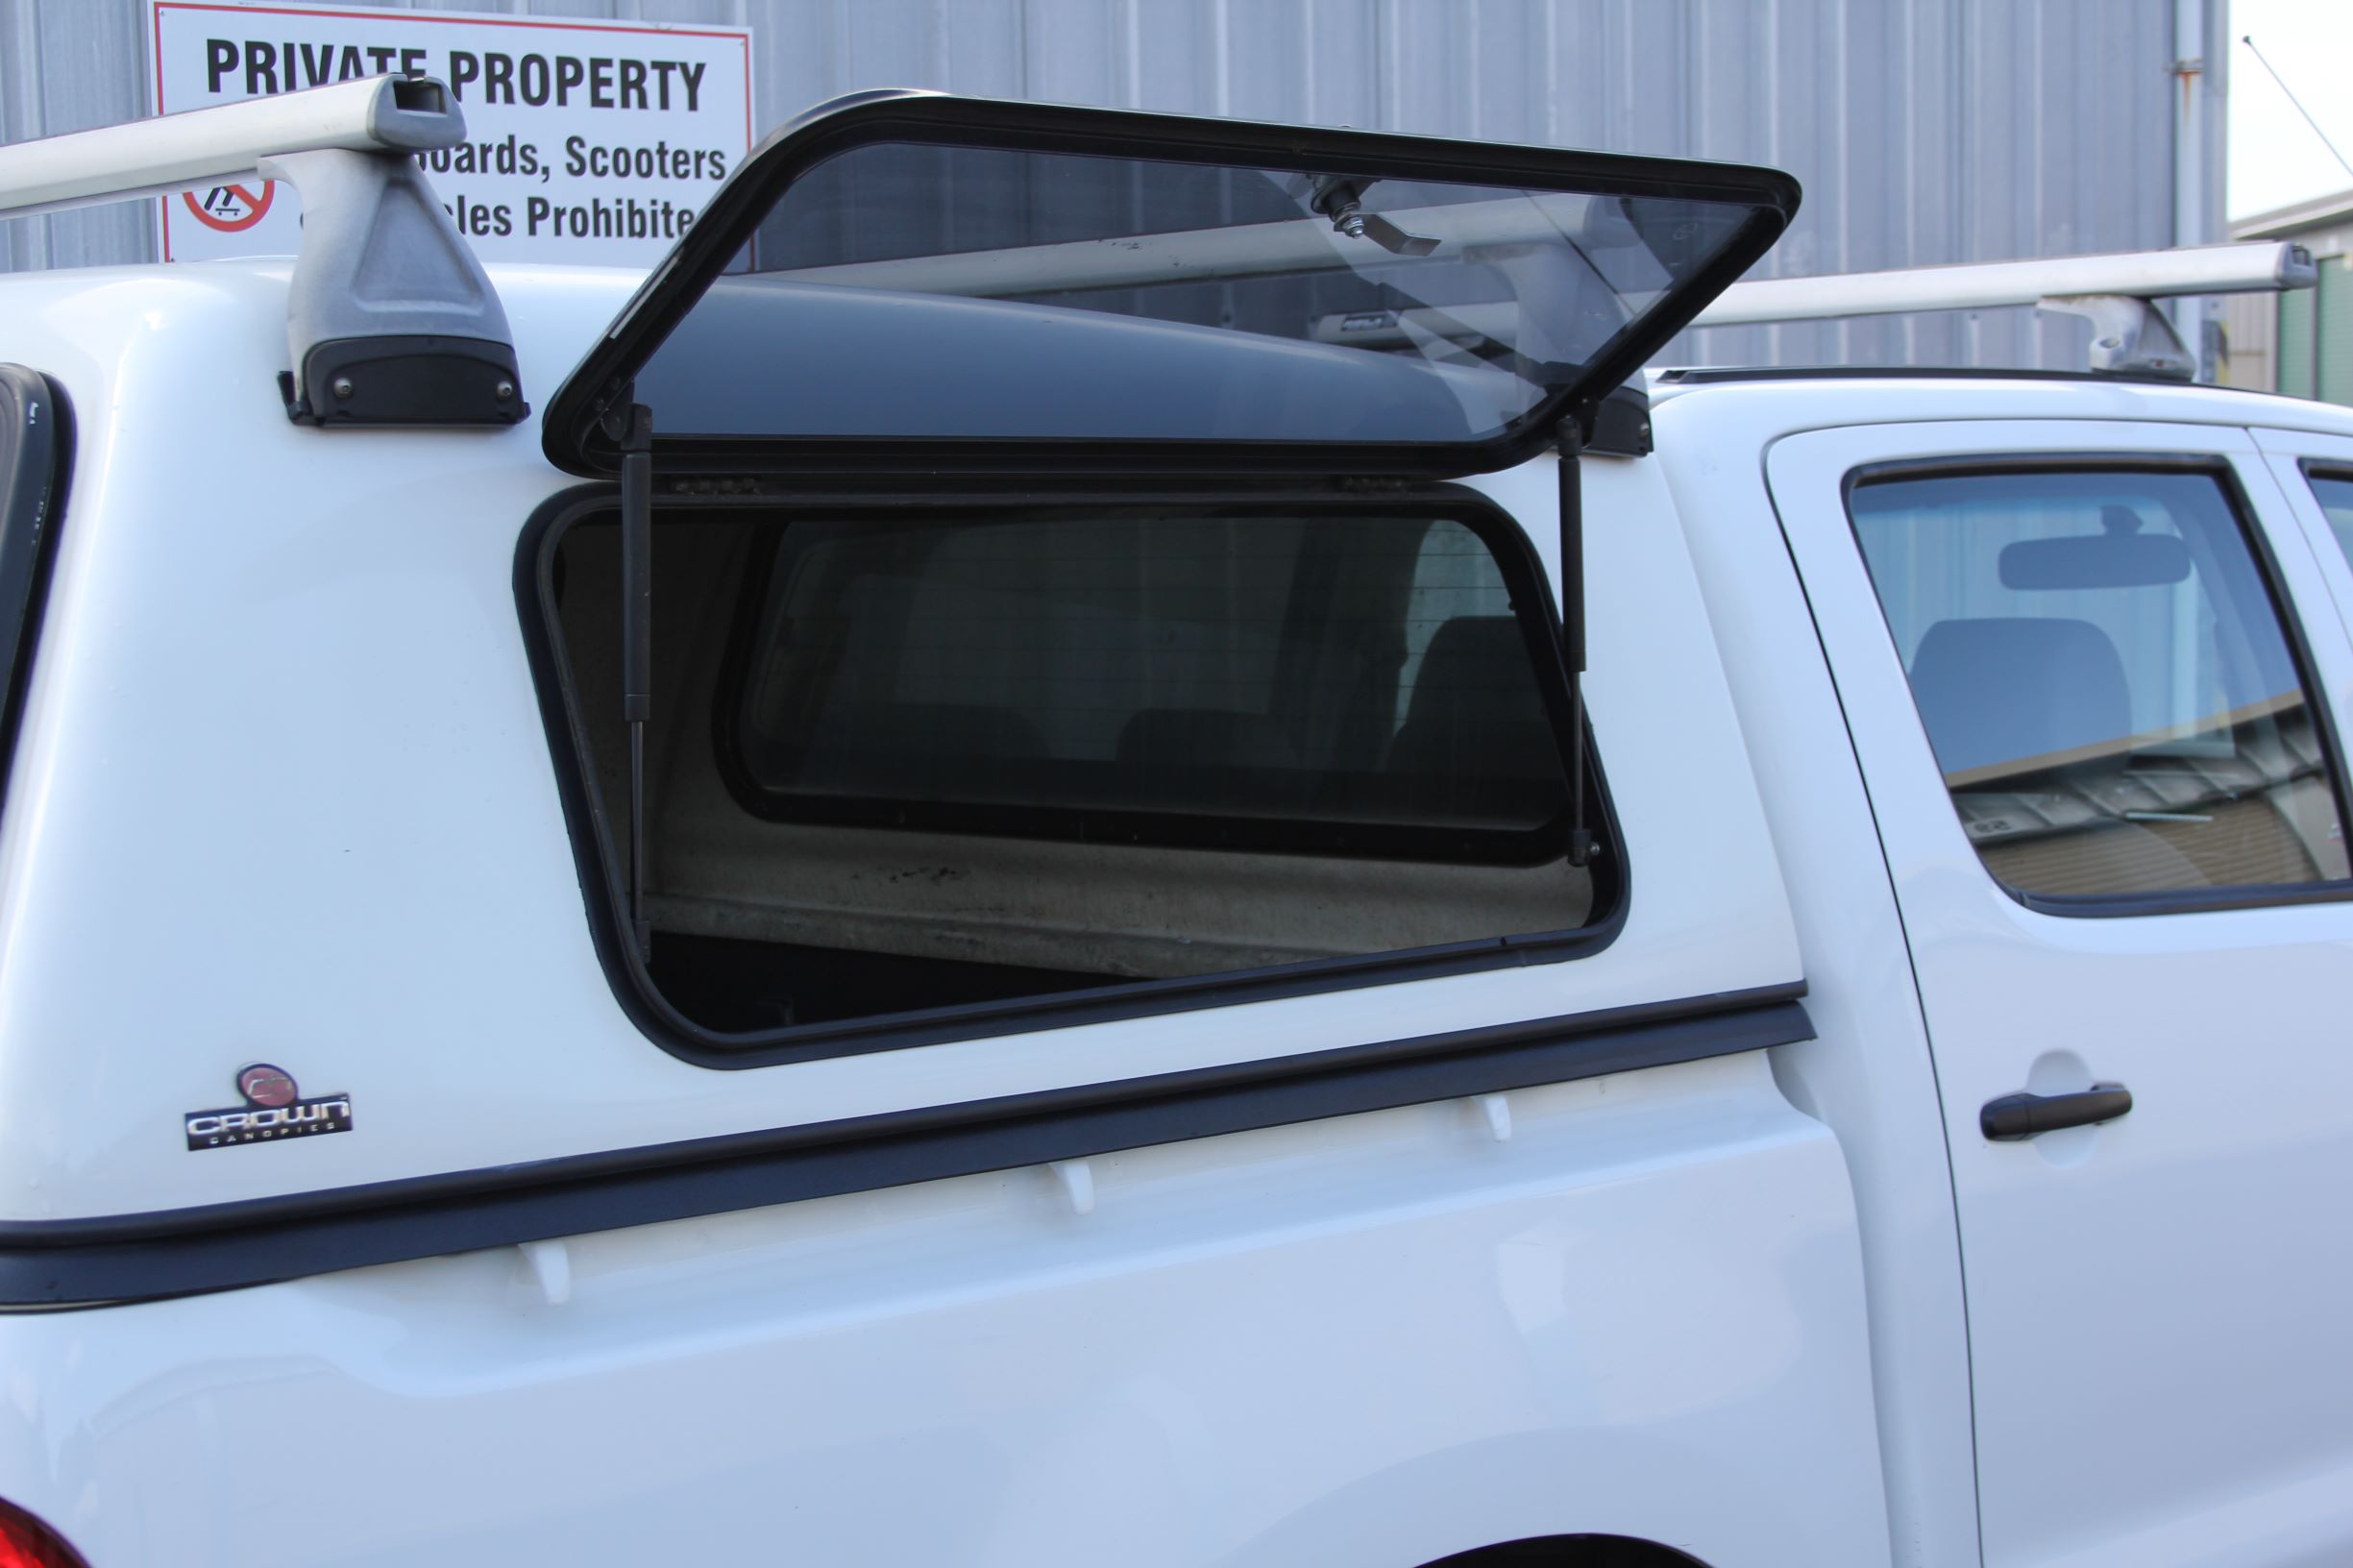 Toyota Hilux 2WD with canopy 2010 for sale in Auckland